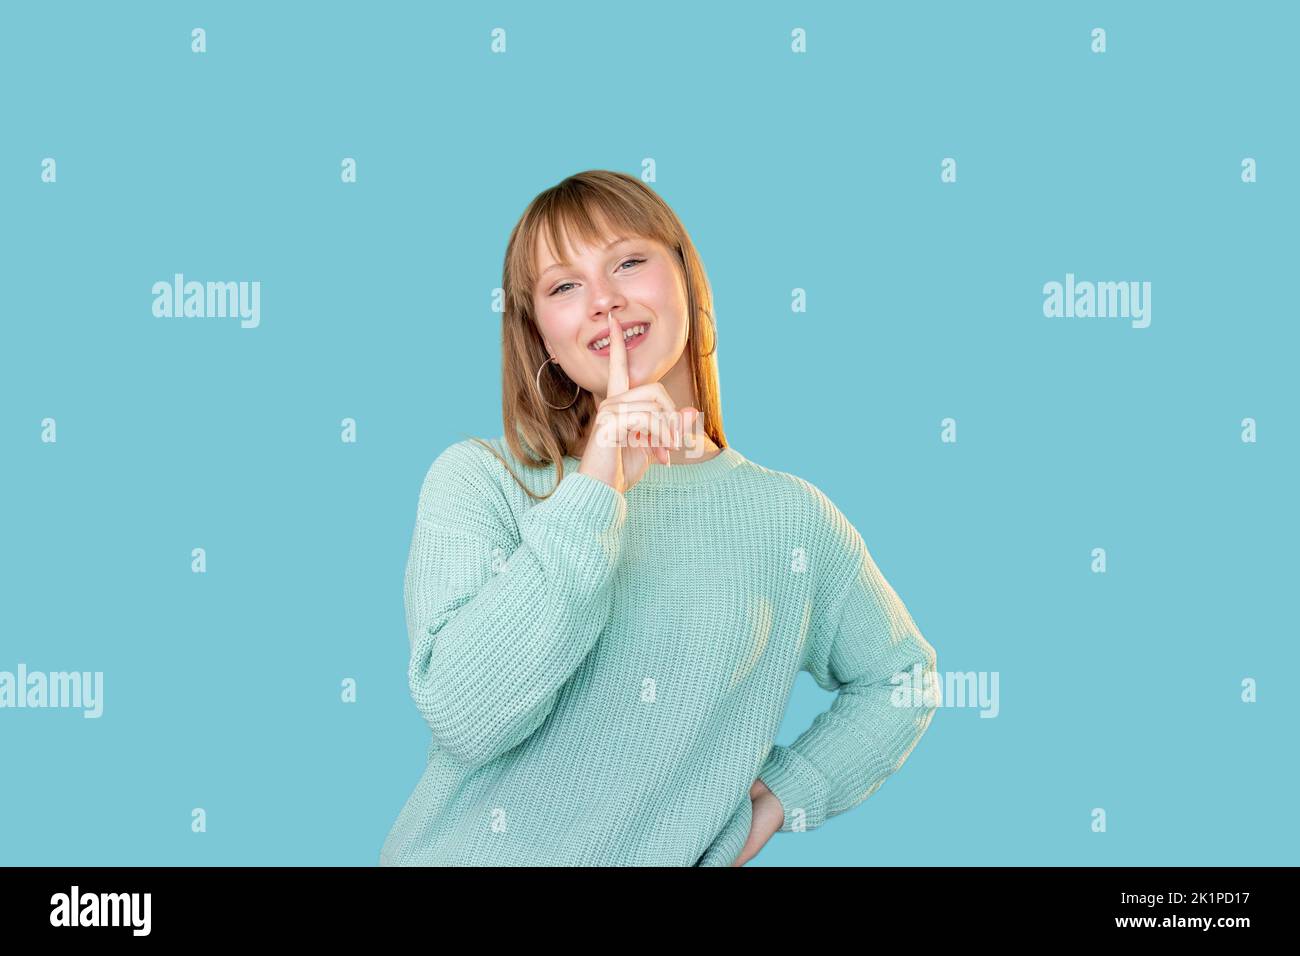 Female gossip. Shush gesture. Dont speak. Special surprise. Portrait of happy enthusiastic fun woman in sweater showing shhh with finger at mouth isol Stock Photo